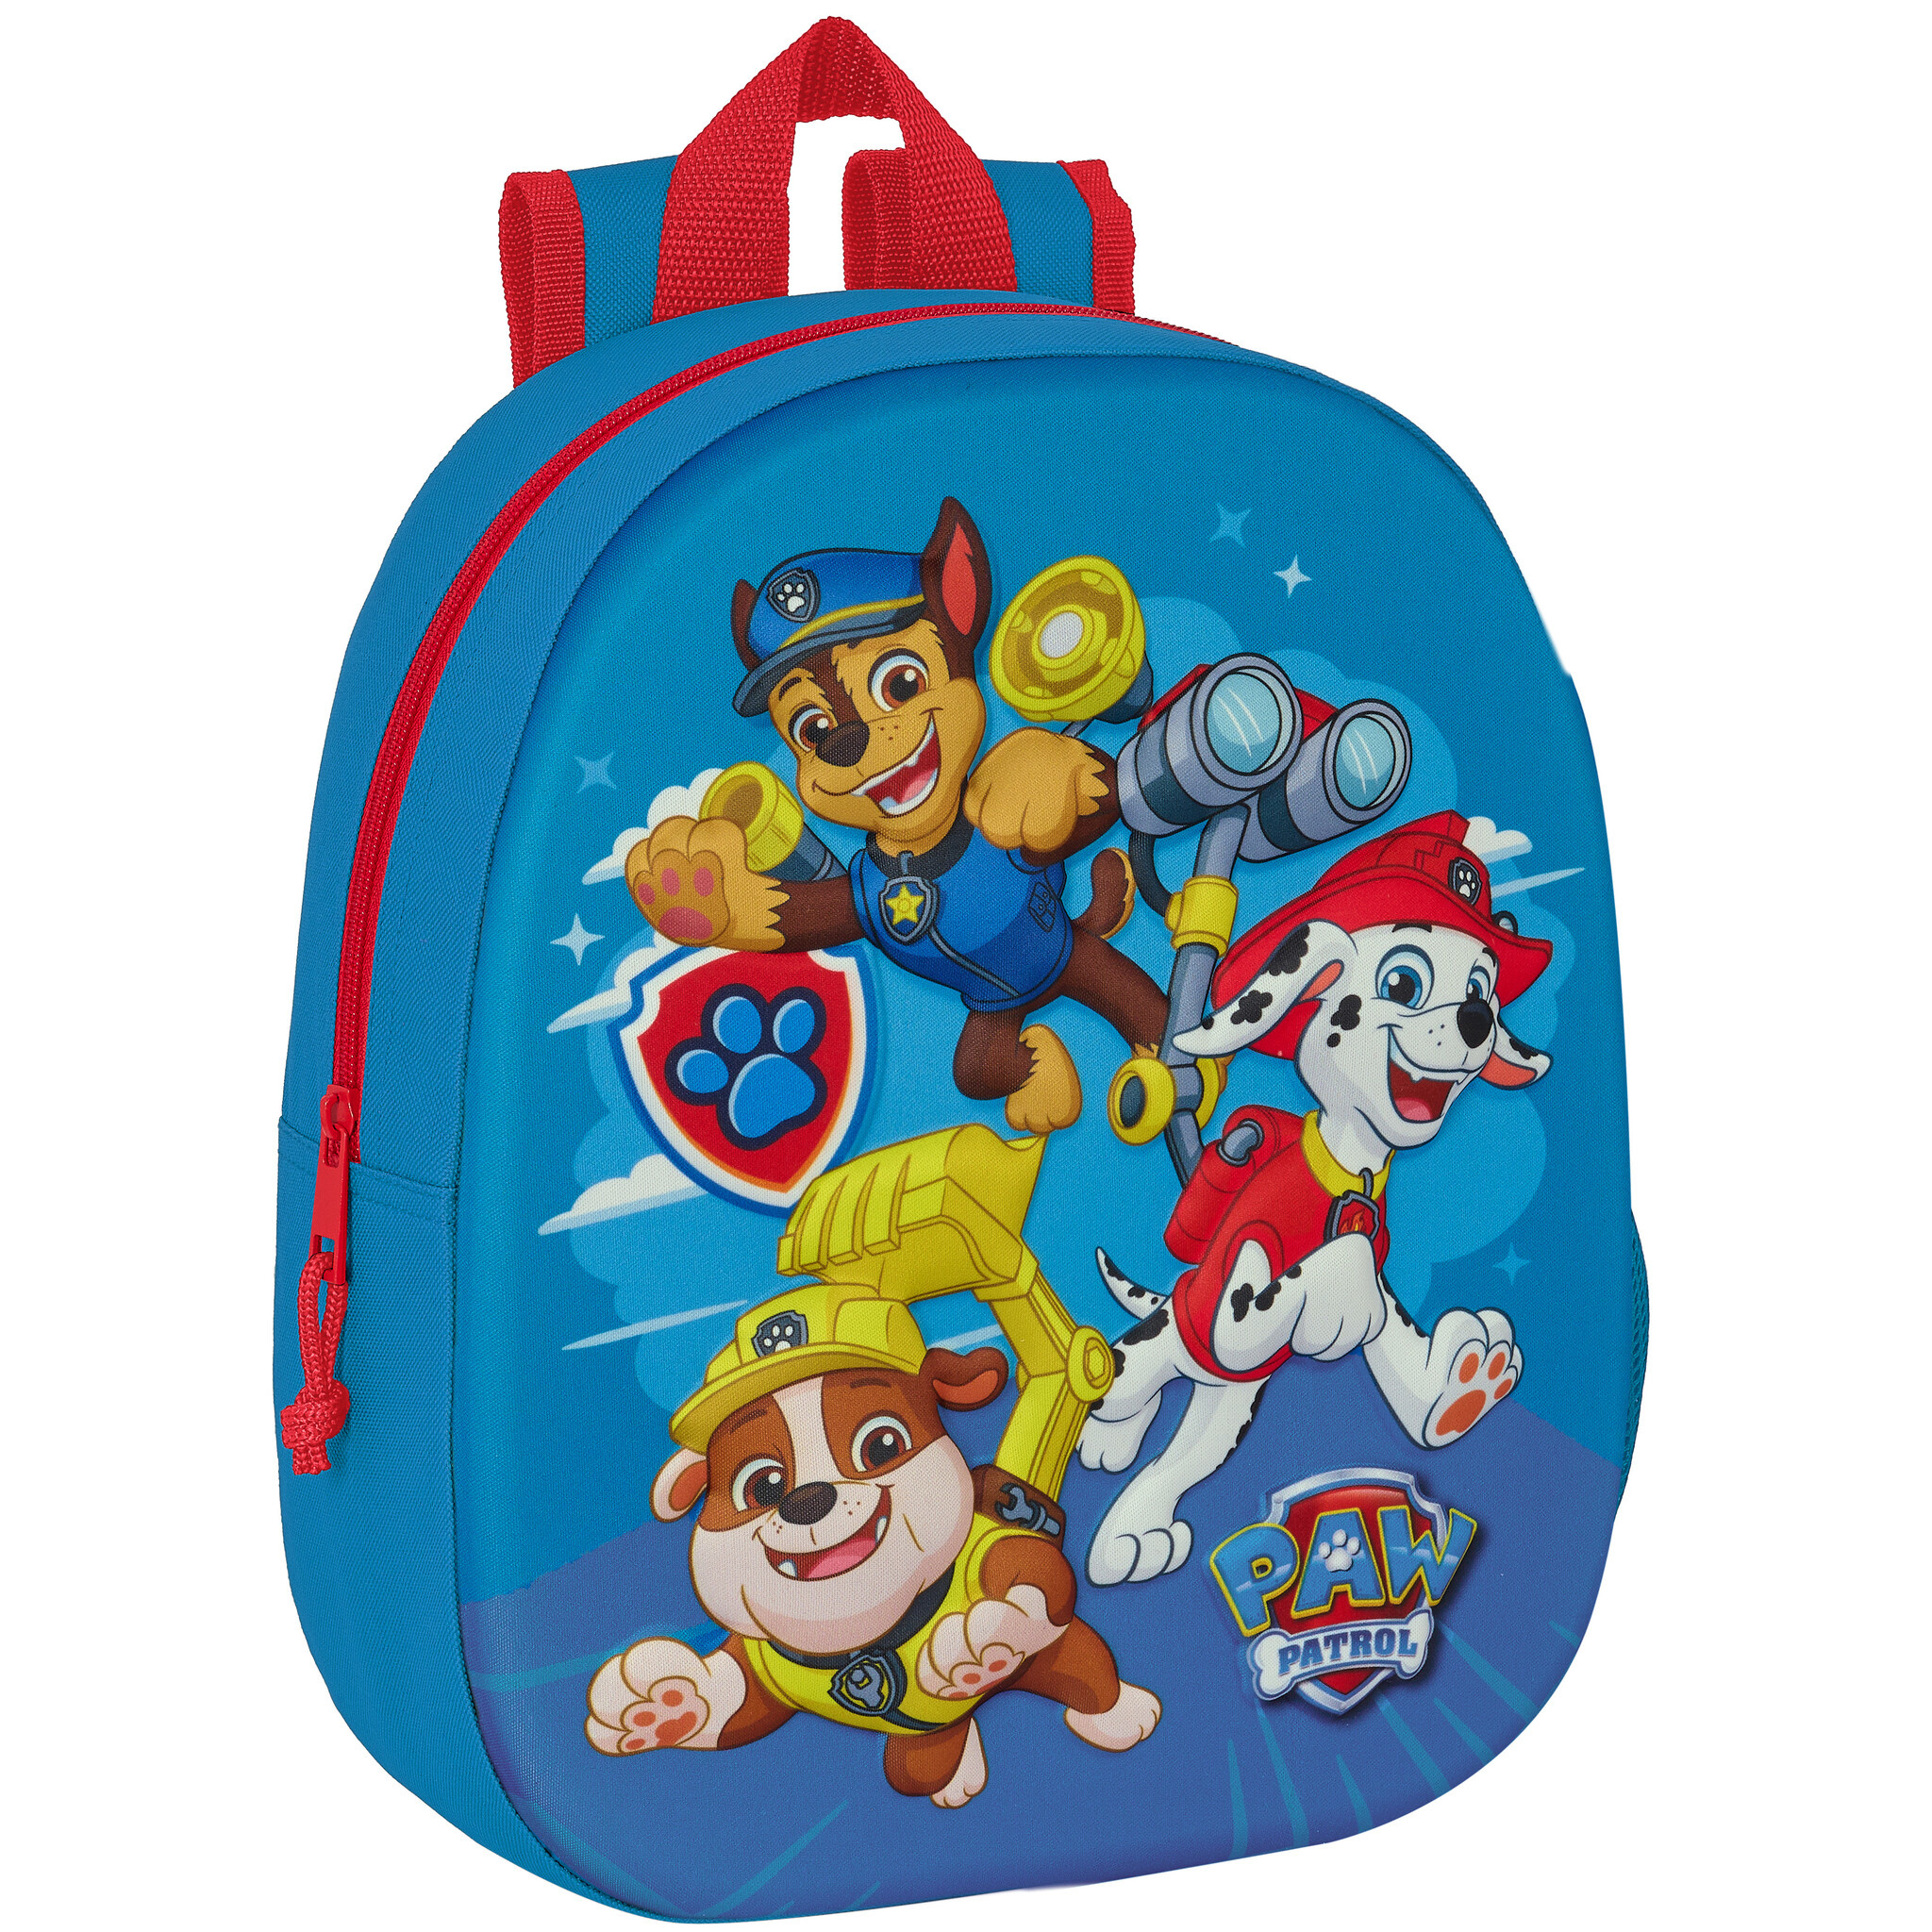 Paw Patrol Backpack, 3D Team - 33 x 27 x 10 cm - Polyester